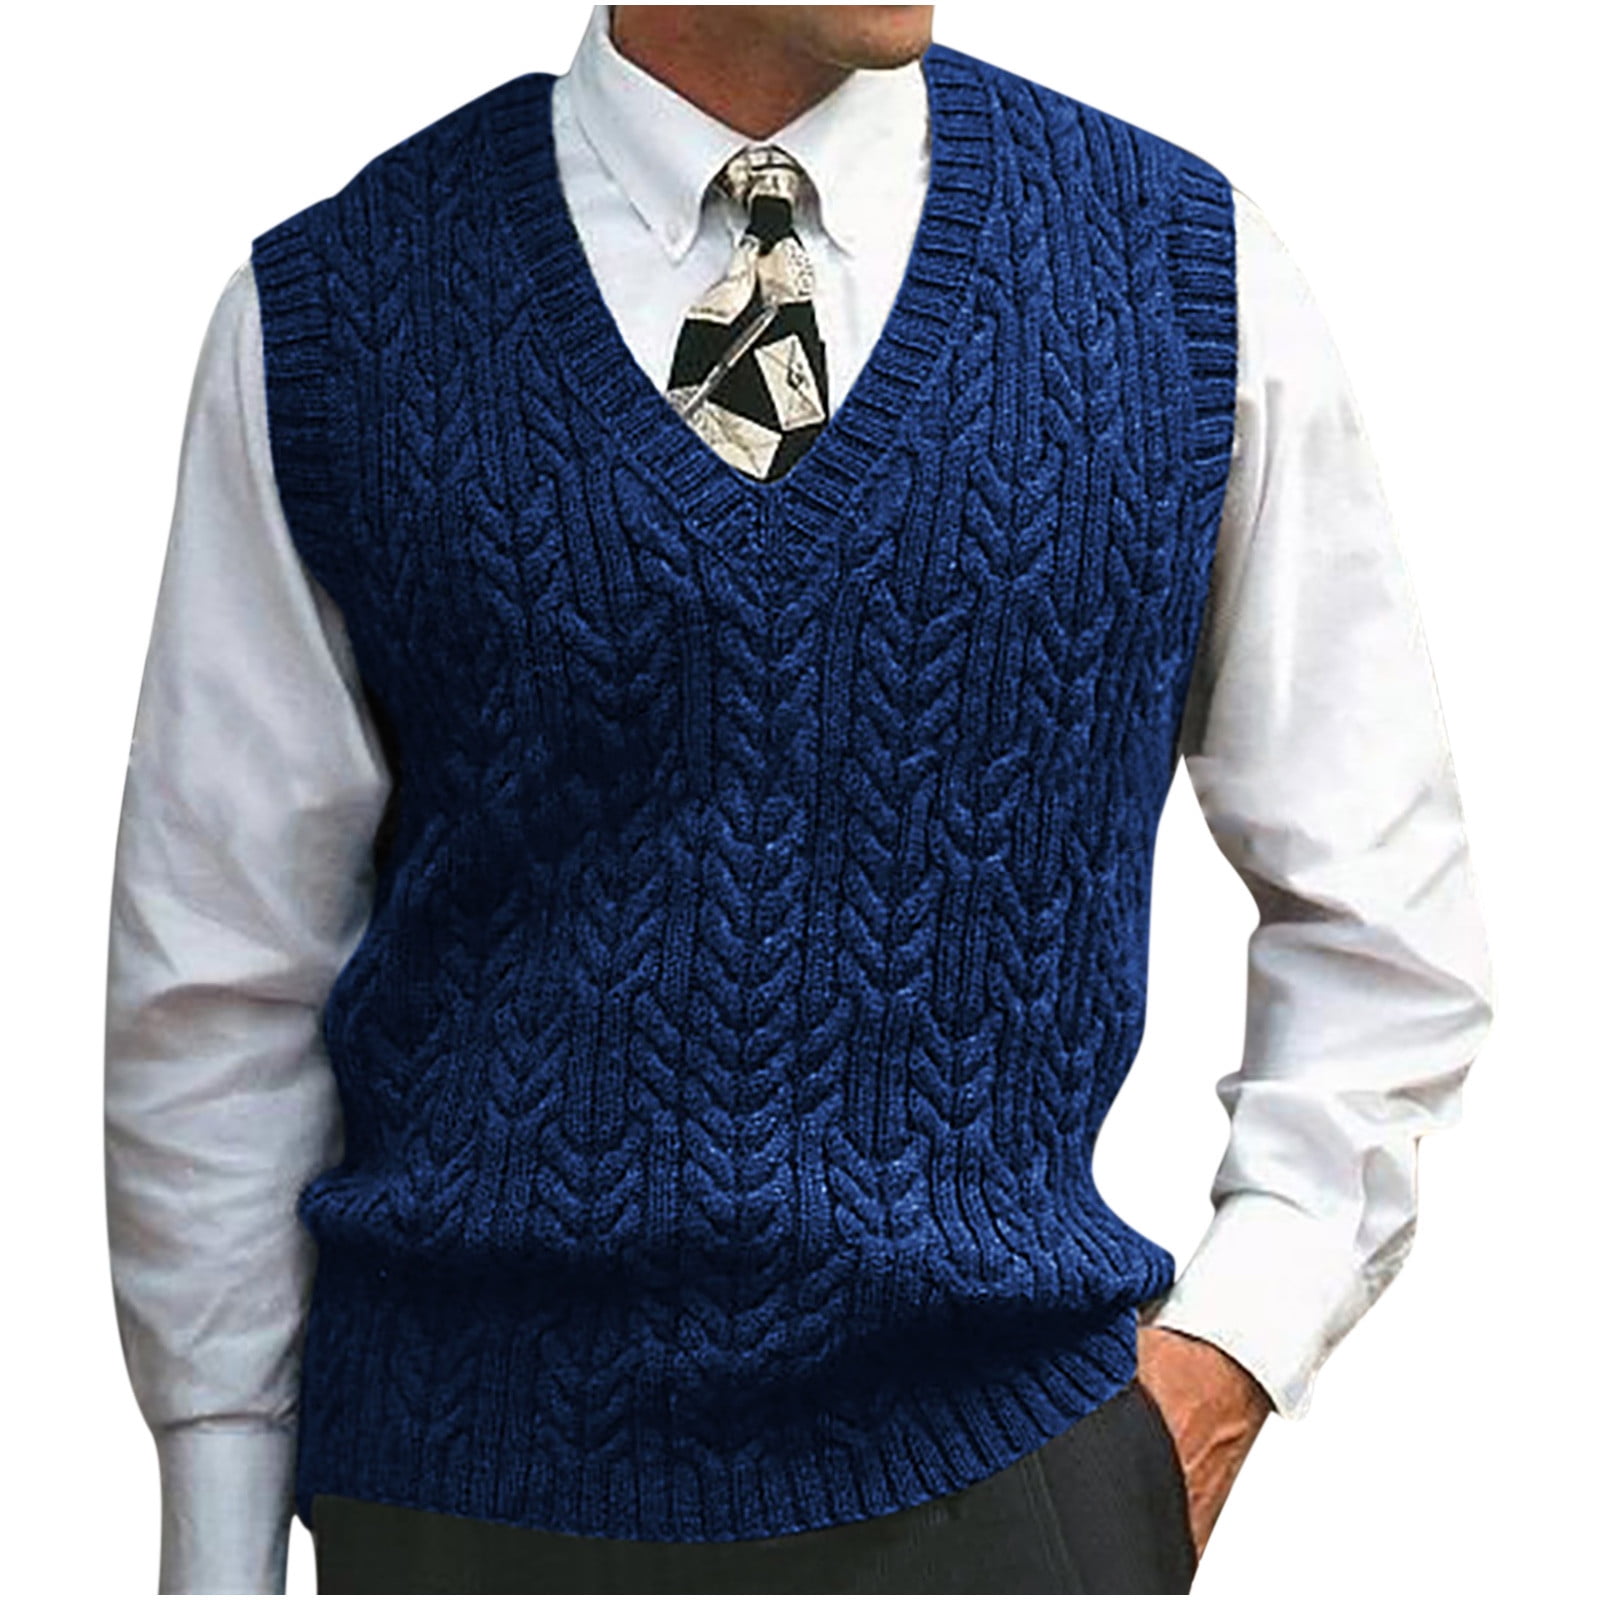 Men Sweater Knitted Vest Warm Cotton Wool V-Neck Sleeveless Pullover Tops Shirts